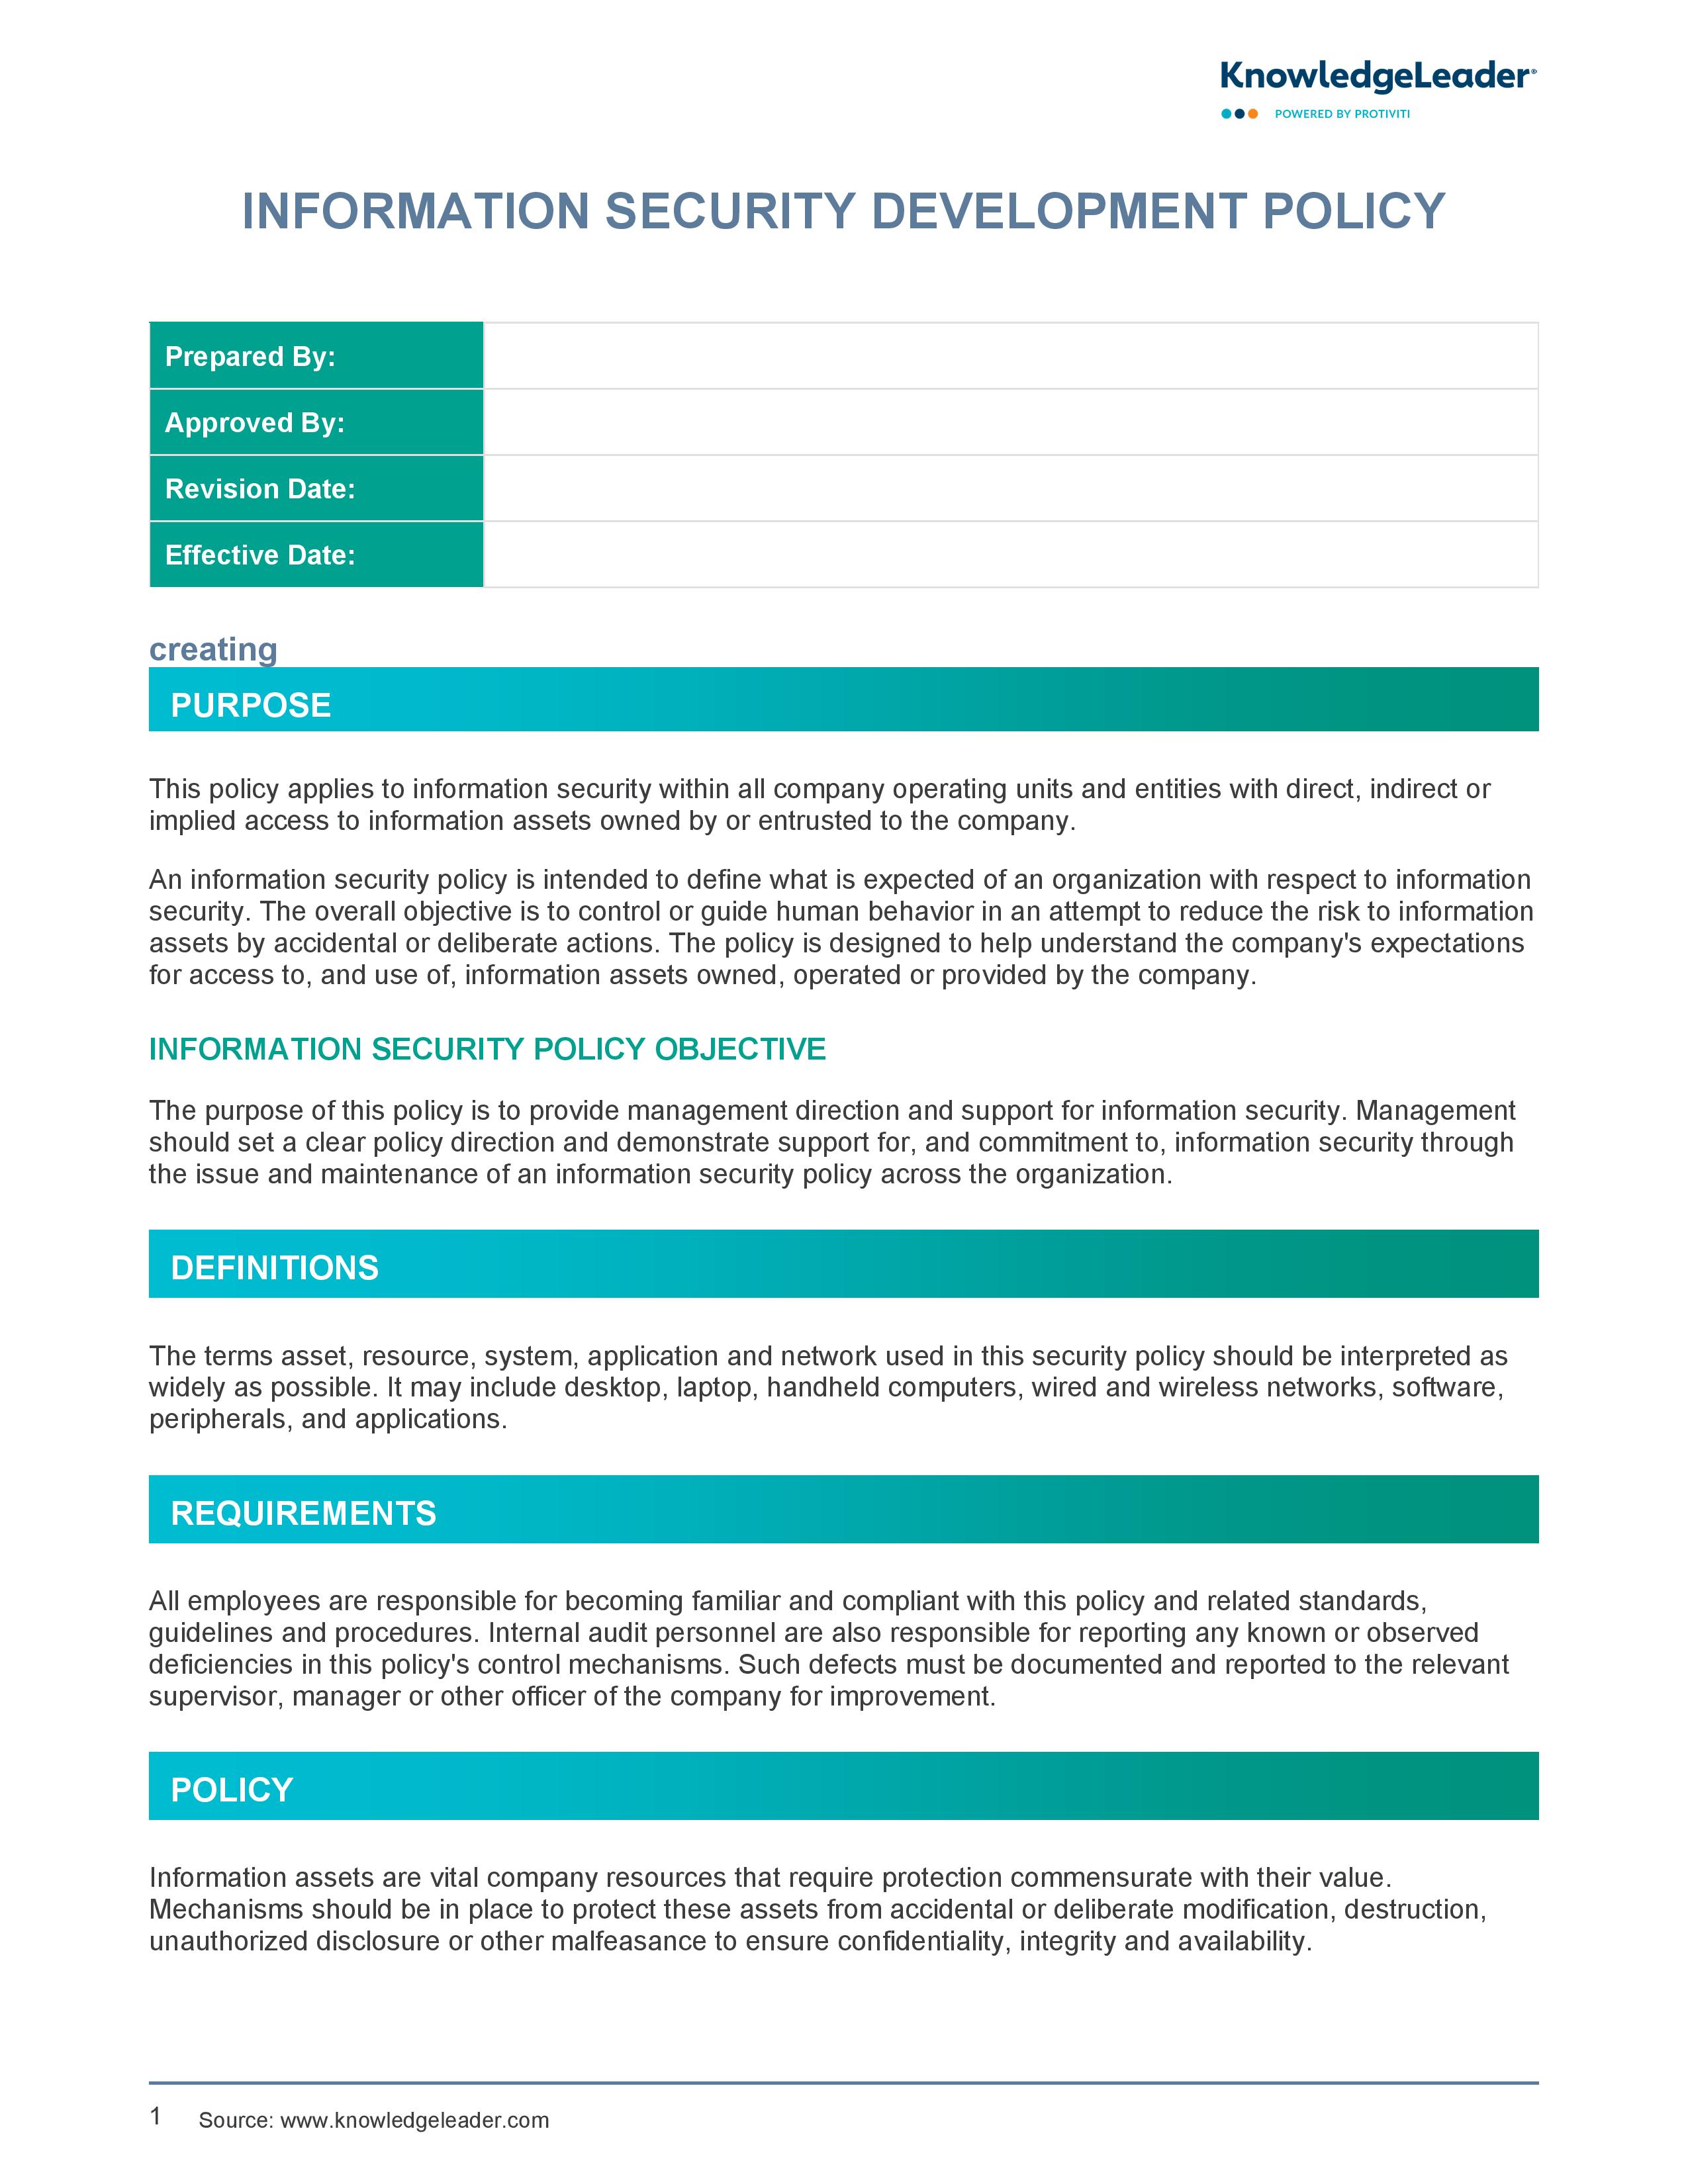 screenshot of the first page of Information Security Development Policy